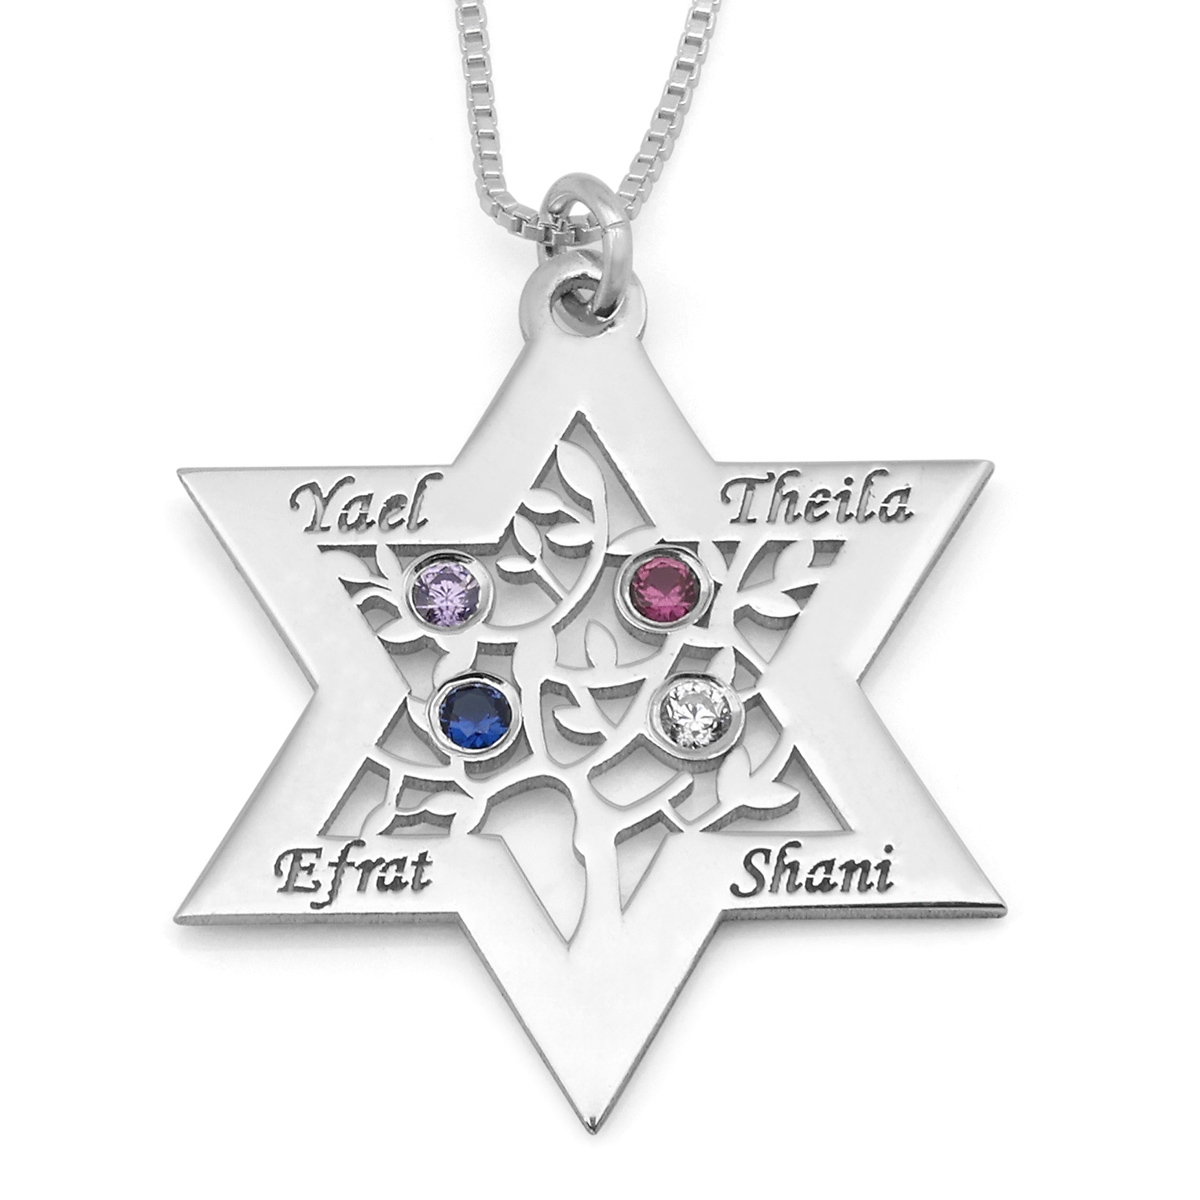 Personalized Birthstone Star of David and Tree of Life Necklace - Sterling Silver or Gold Plated - 1